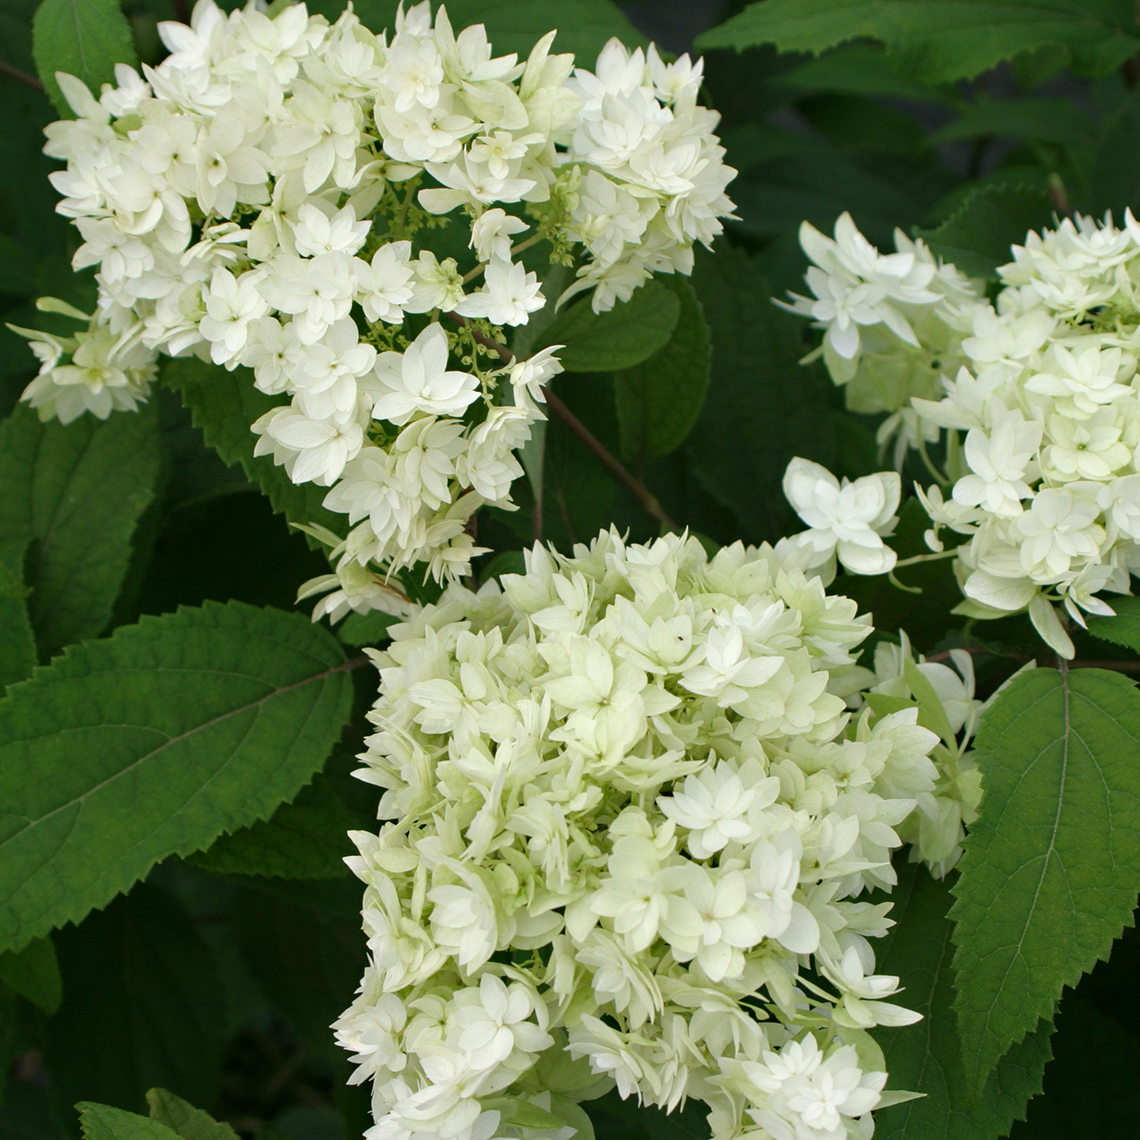 Three flowers of Hayes Starburst hydrangea showing their unique double florets